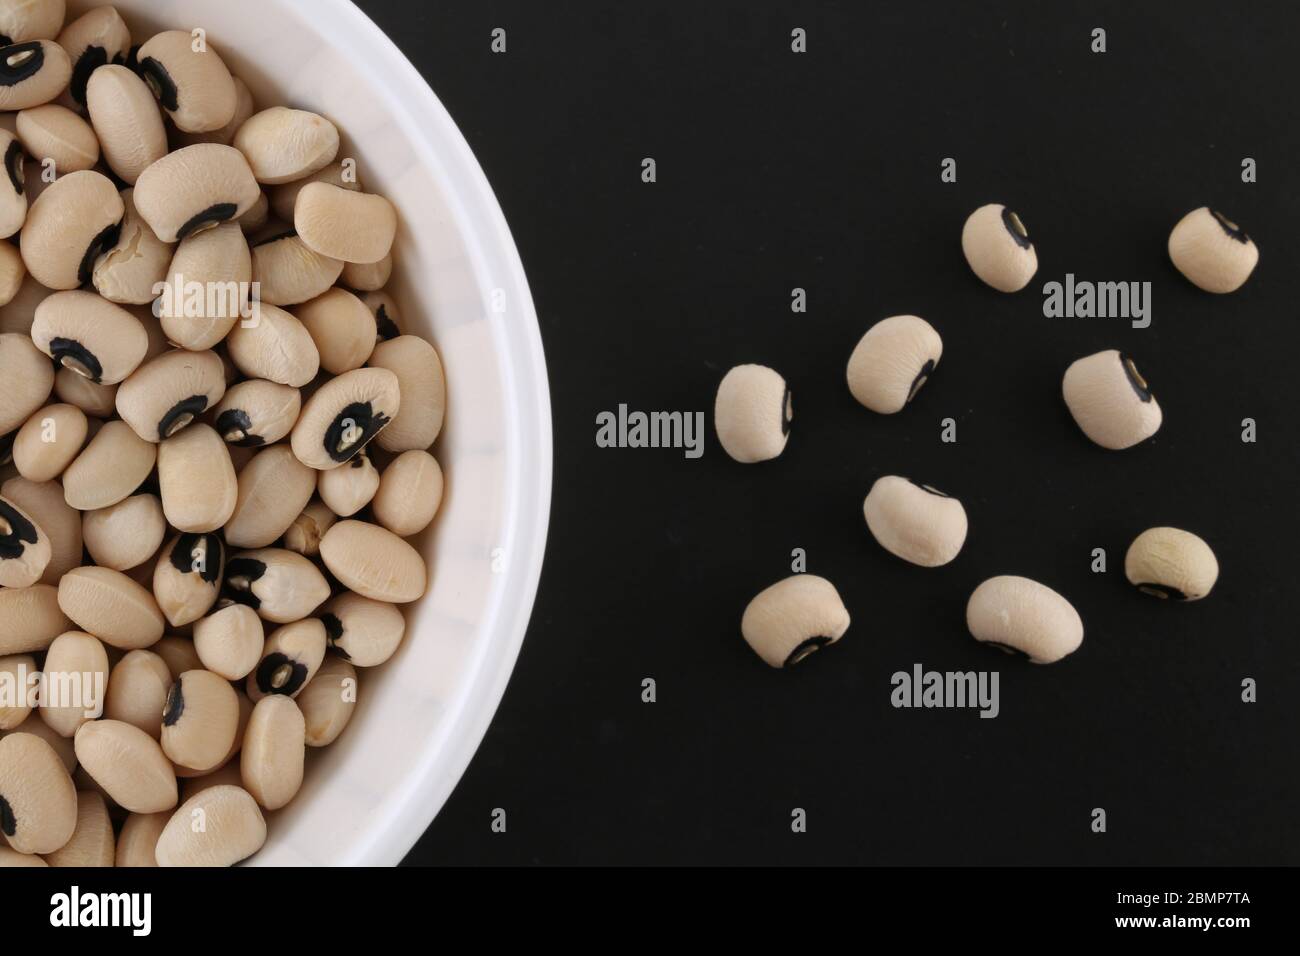 Black-eyed Beans Black background. Have a good aroma, creamy texture and distinctive flavor. Stock Photo